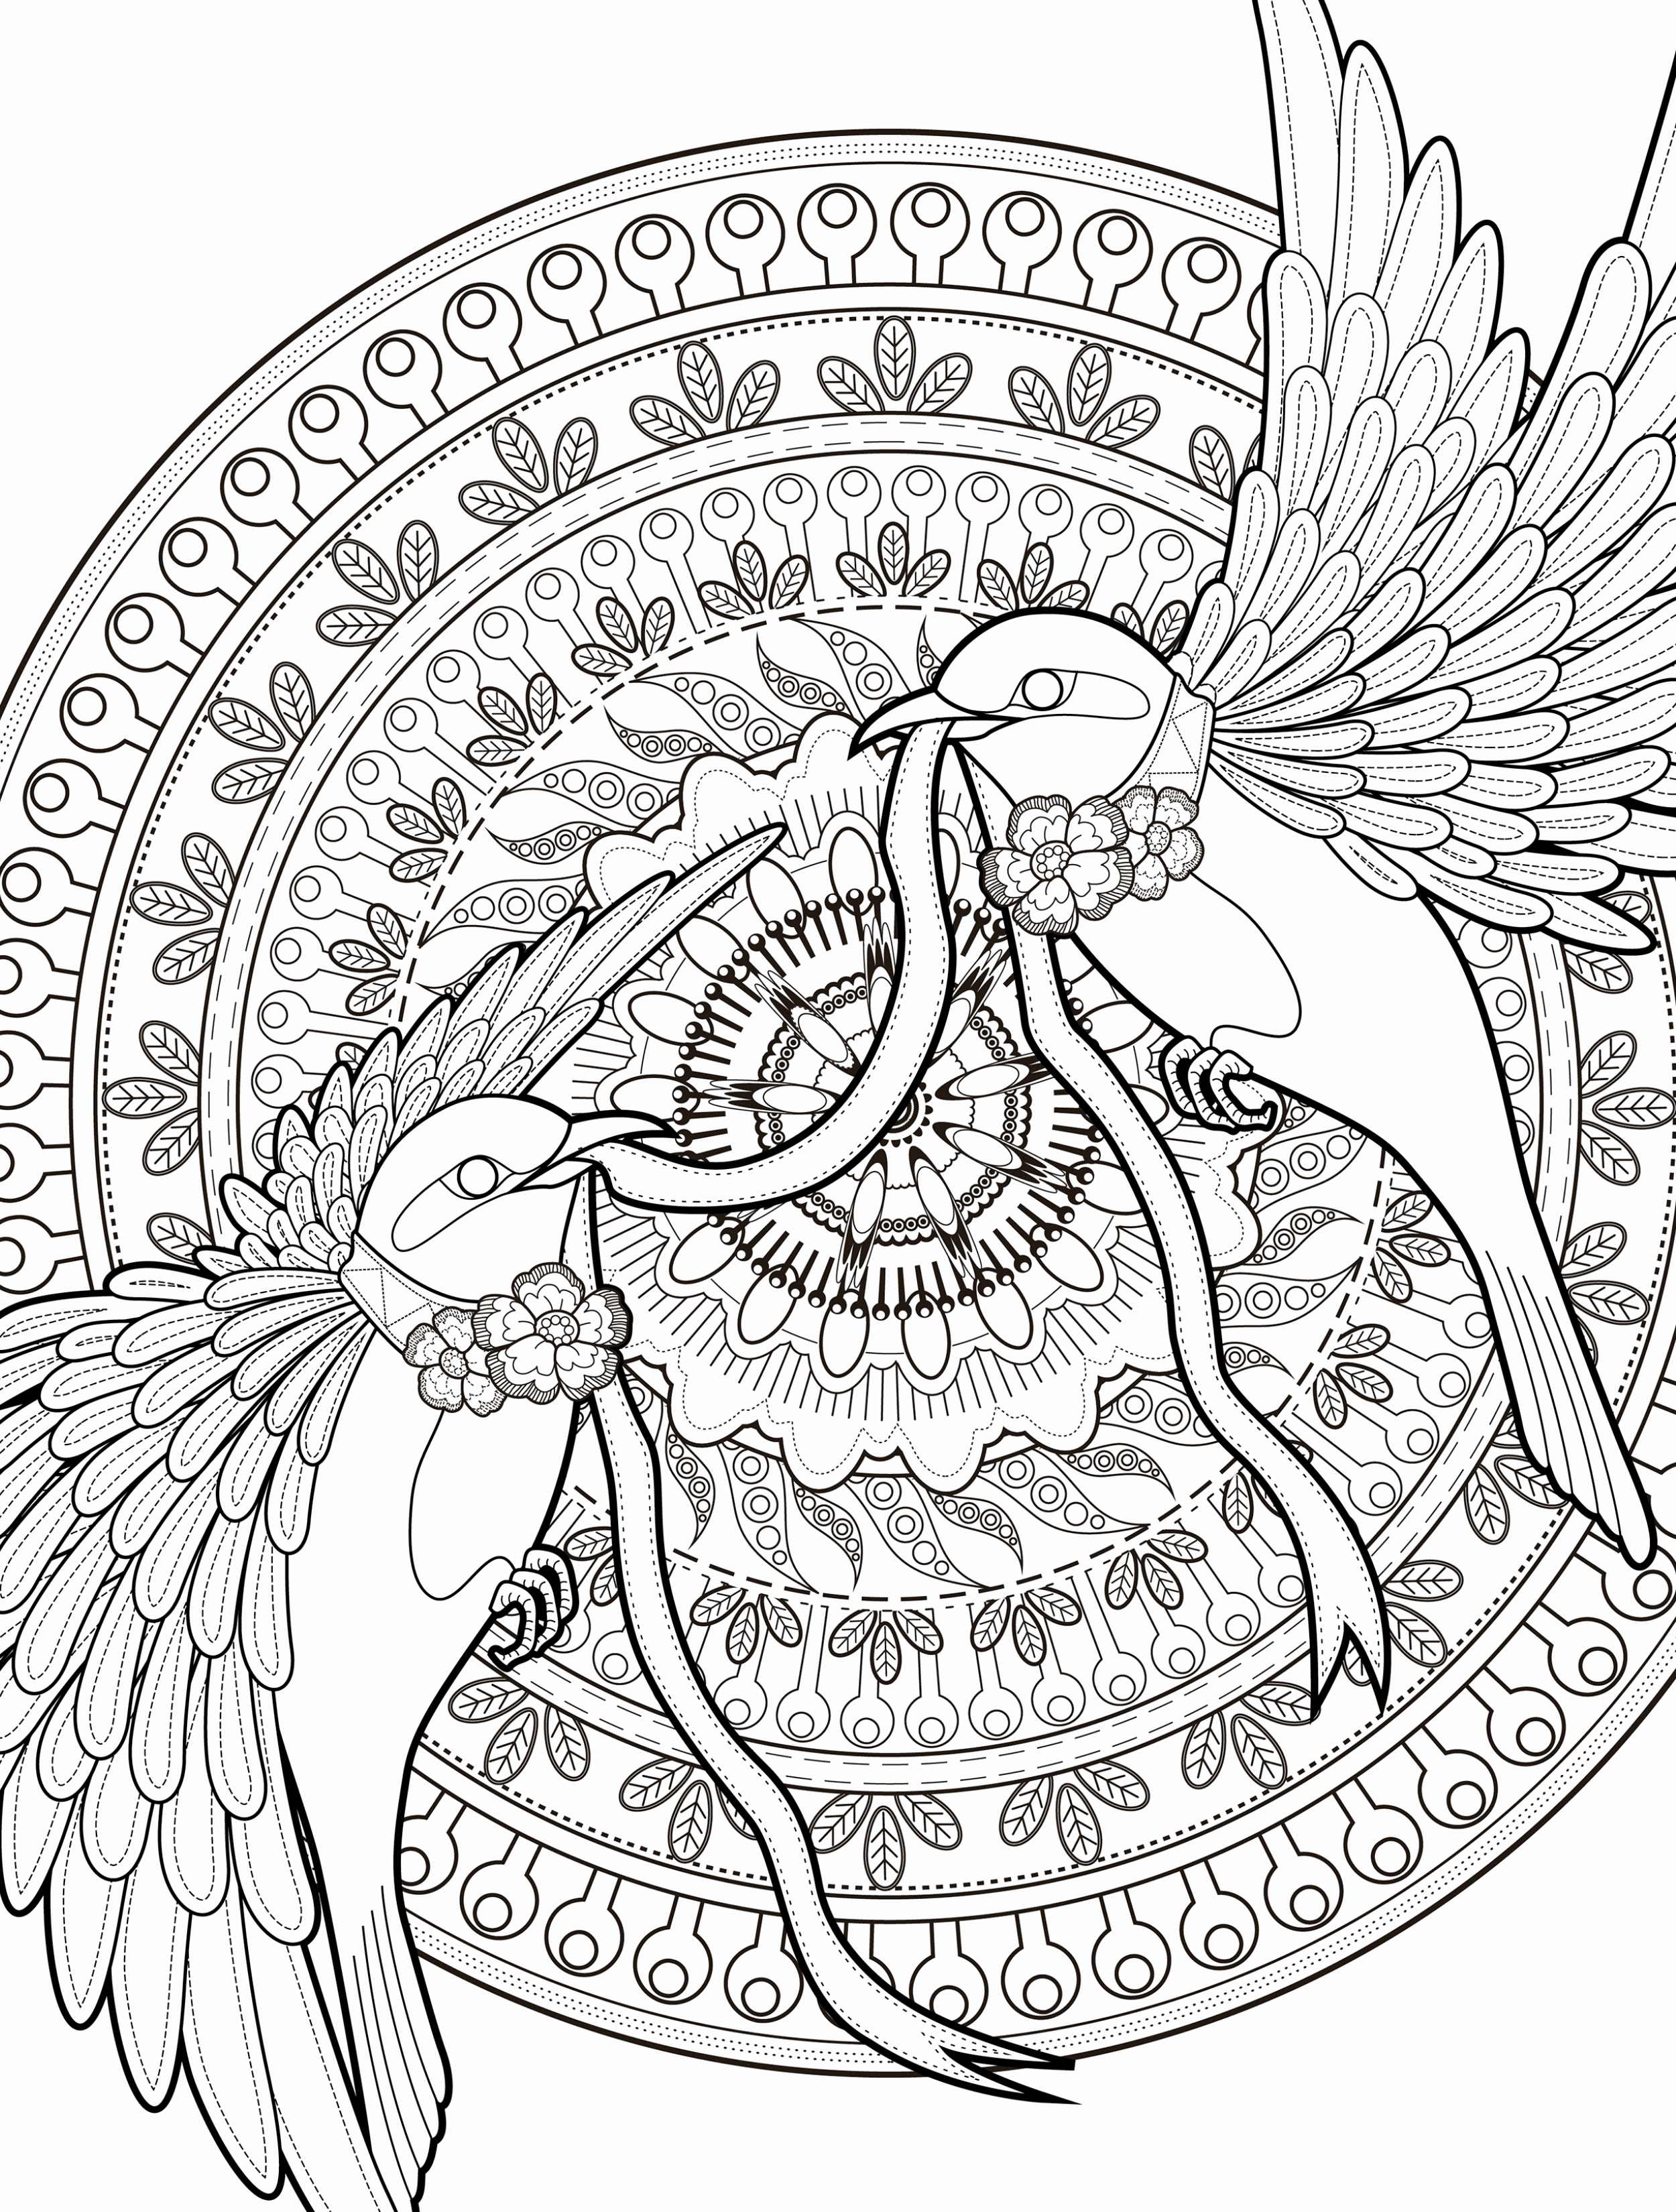 coloring-pages-for-adults-etsy